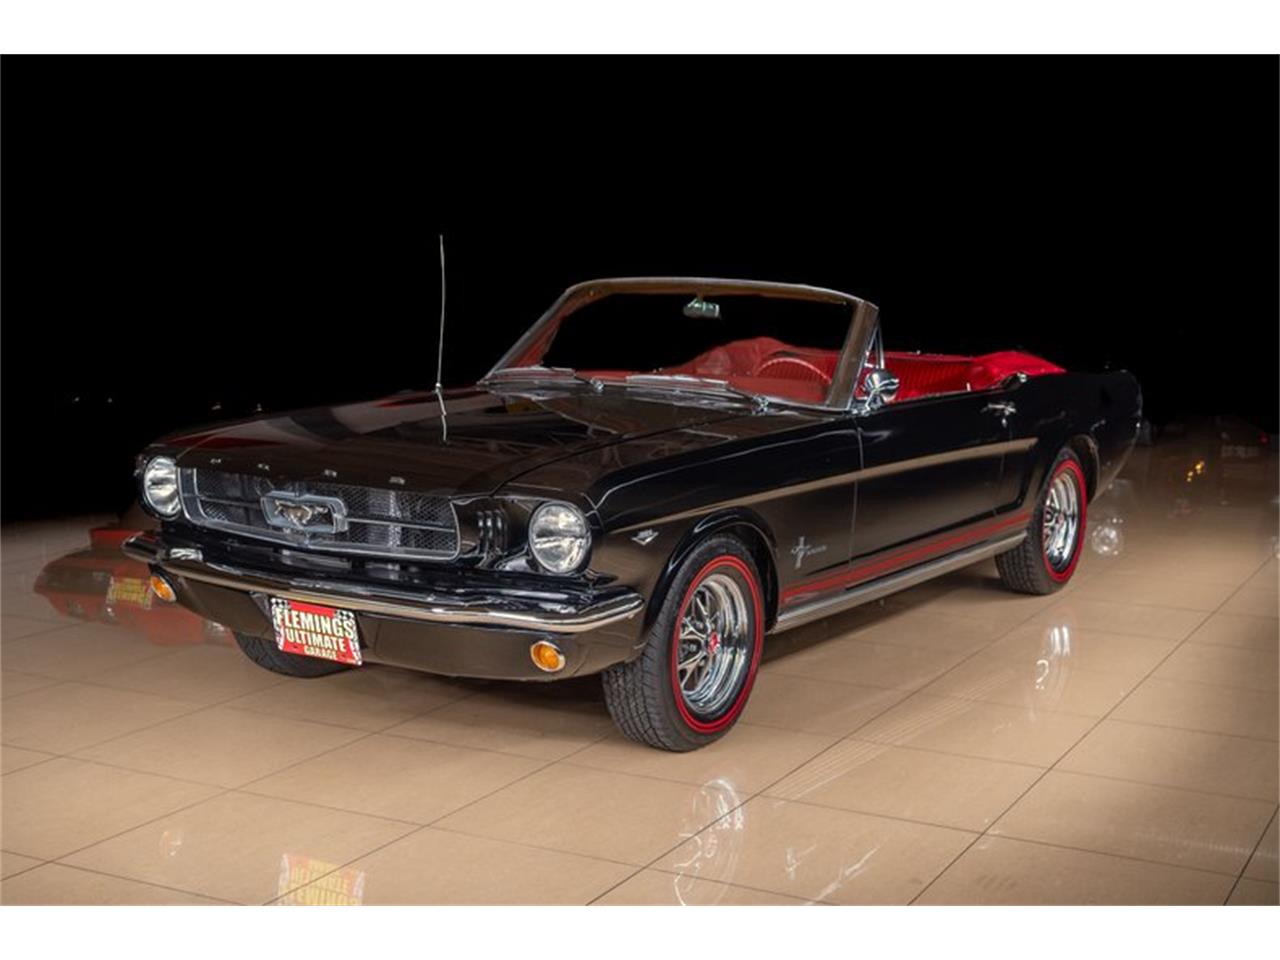 For Sale: 1965 Ford Mustang in Rockville, Maryland for sale in Rockville, MD